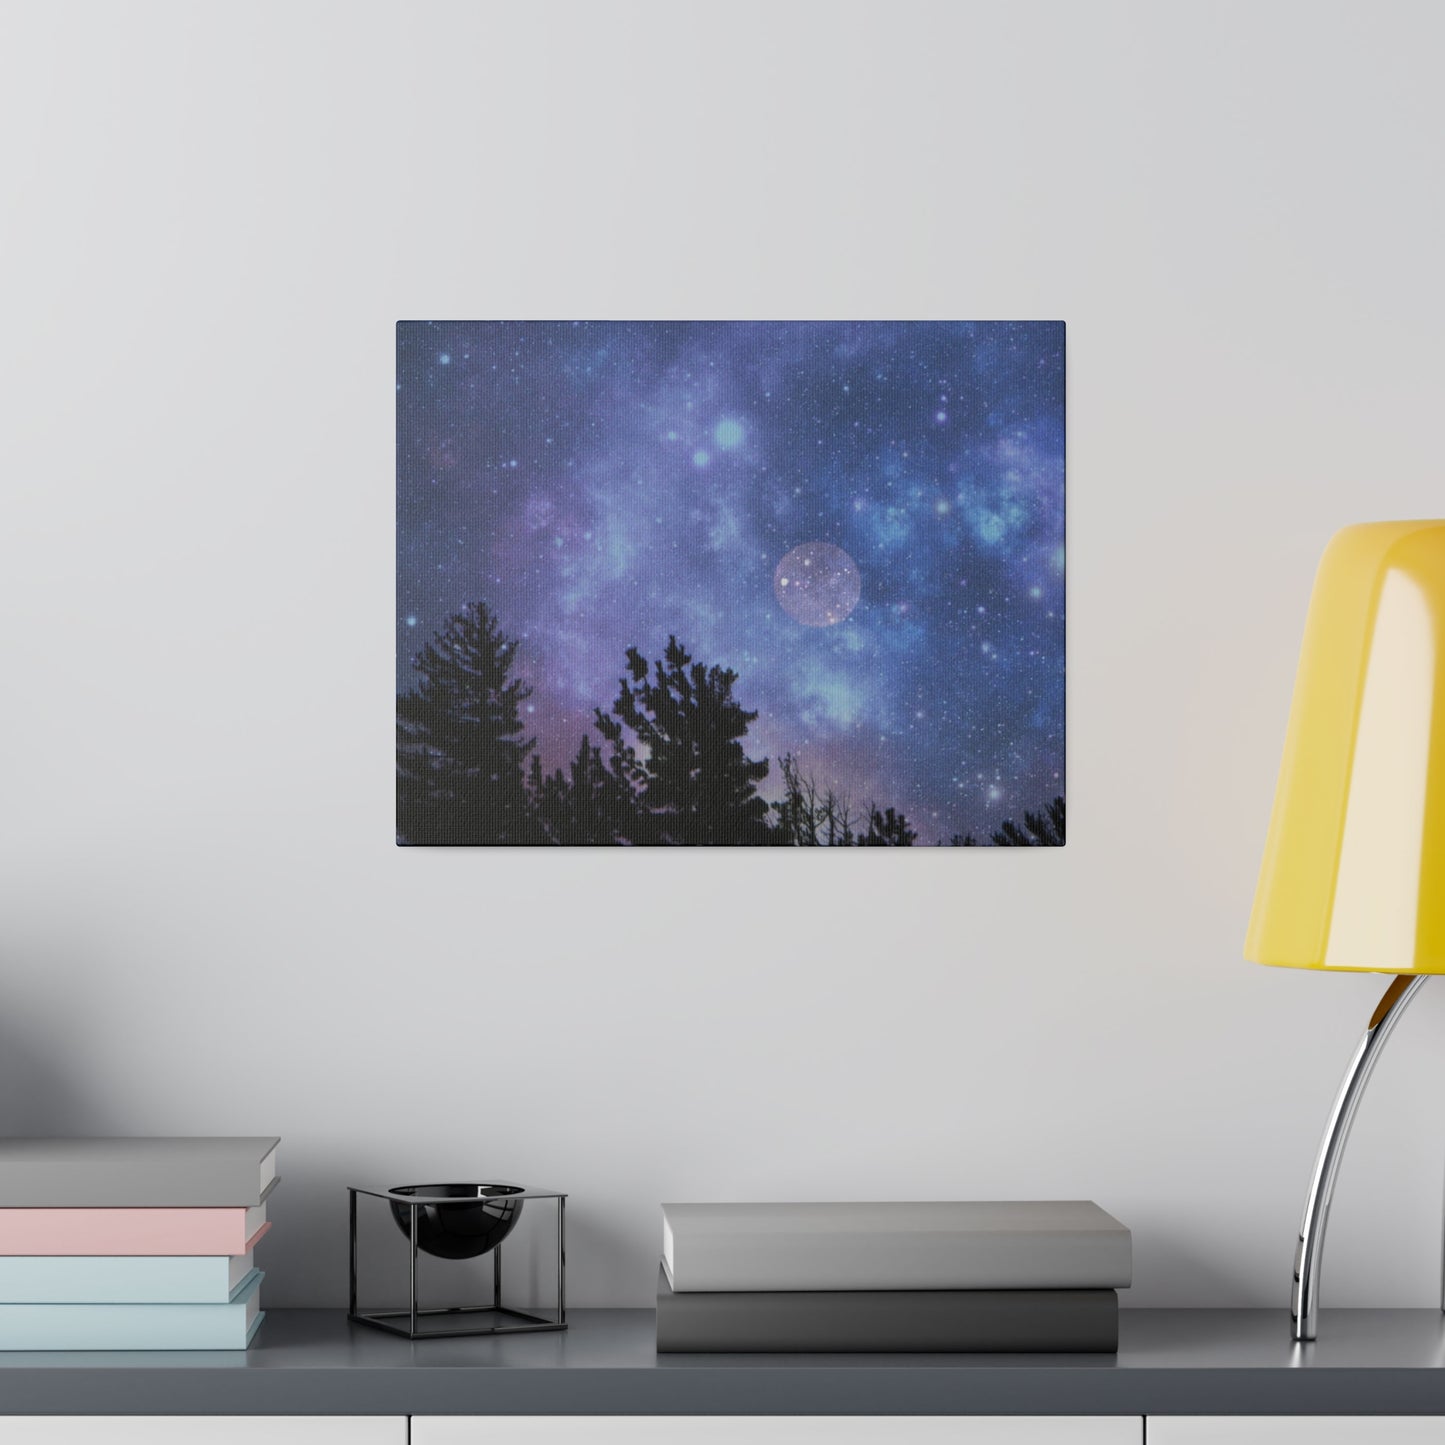 A cosmic wall art featuring a starry night sky and silhouette of trees above a stack of books, portrayed on a Printify Blue-Moon Matte Canvas next to a yellow lamp.